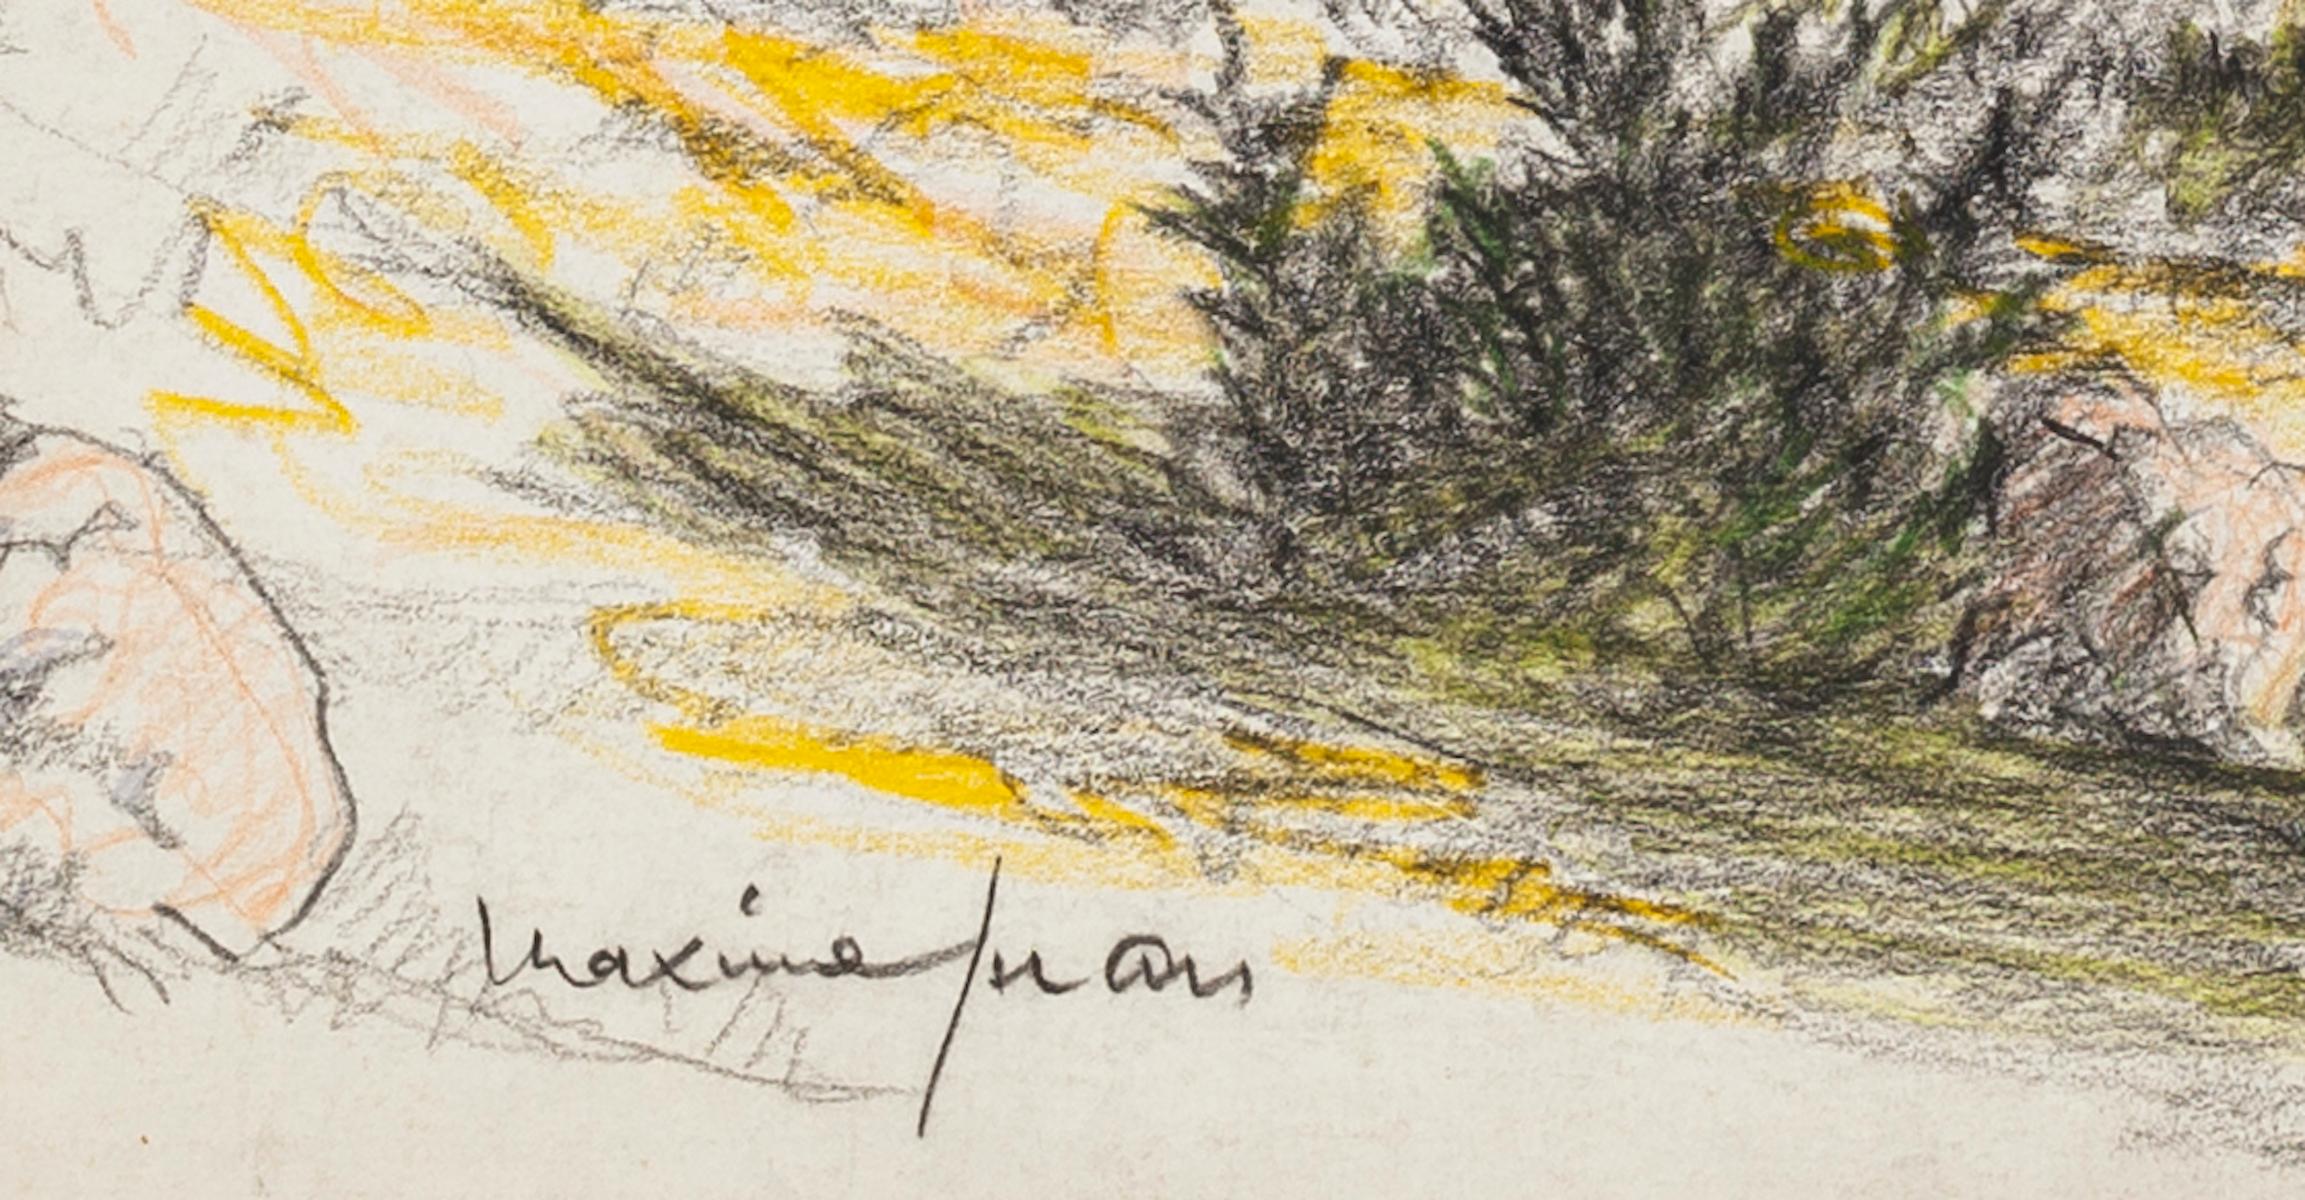 Landscape - Pencil and Pastel Drawing by M. Juan - 1950s - Art by Maxime Juan